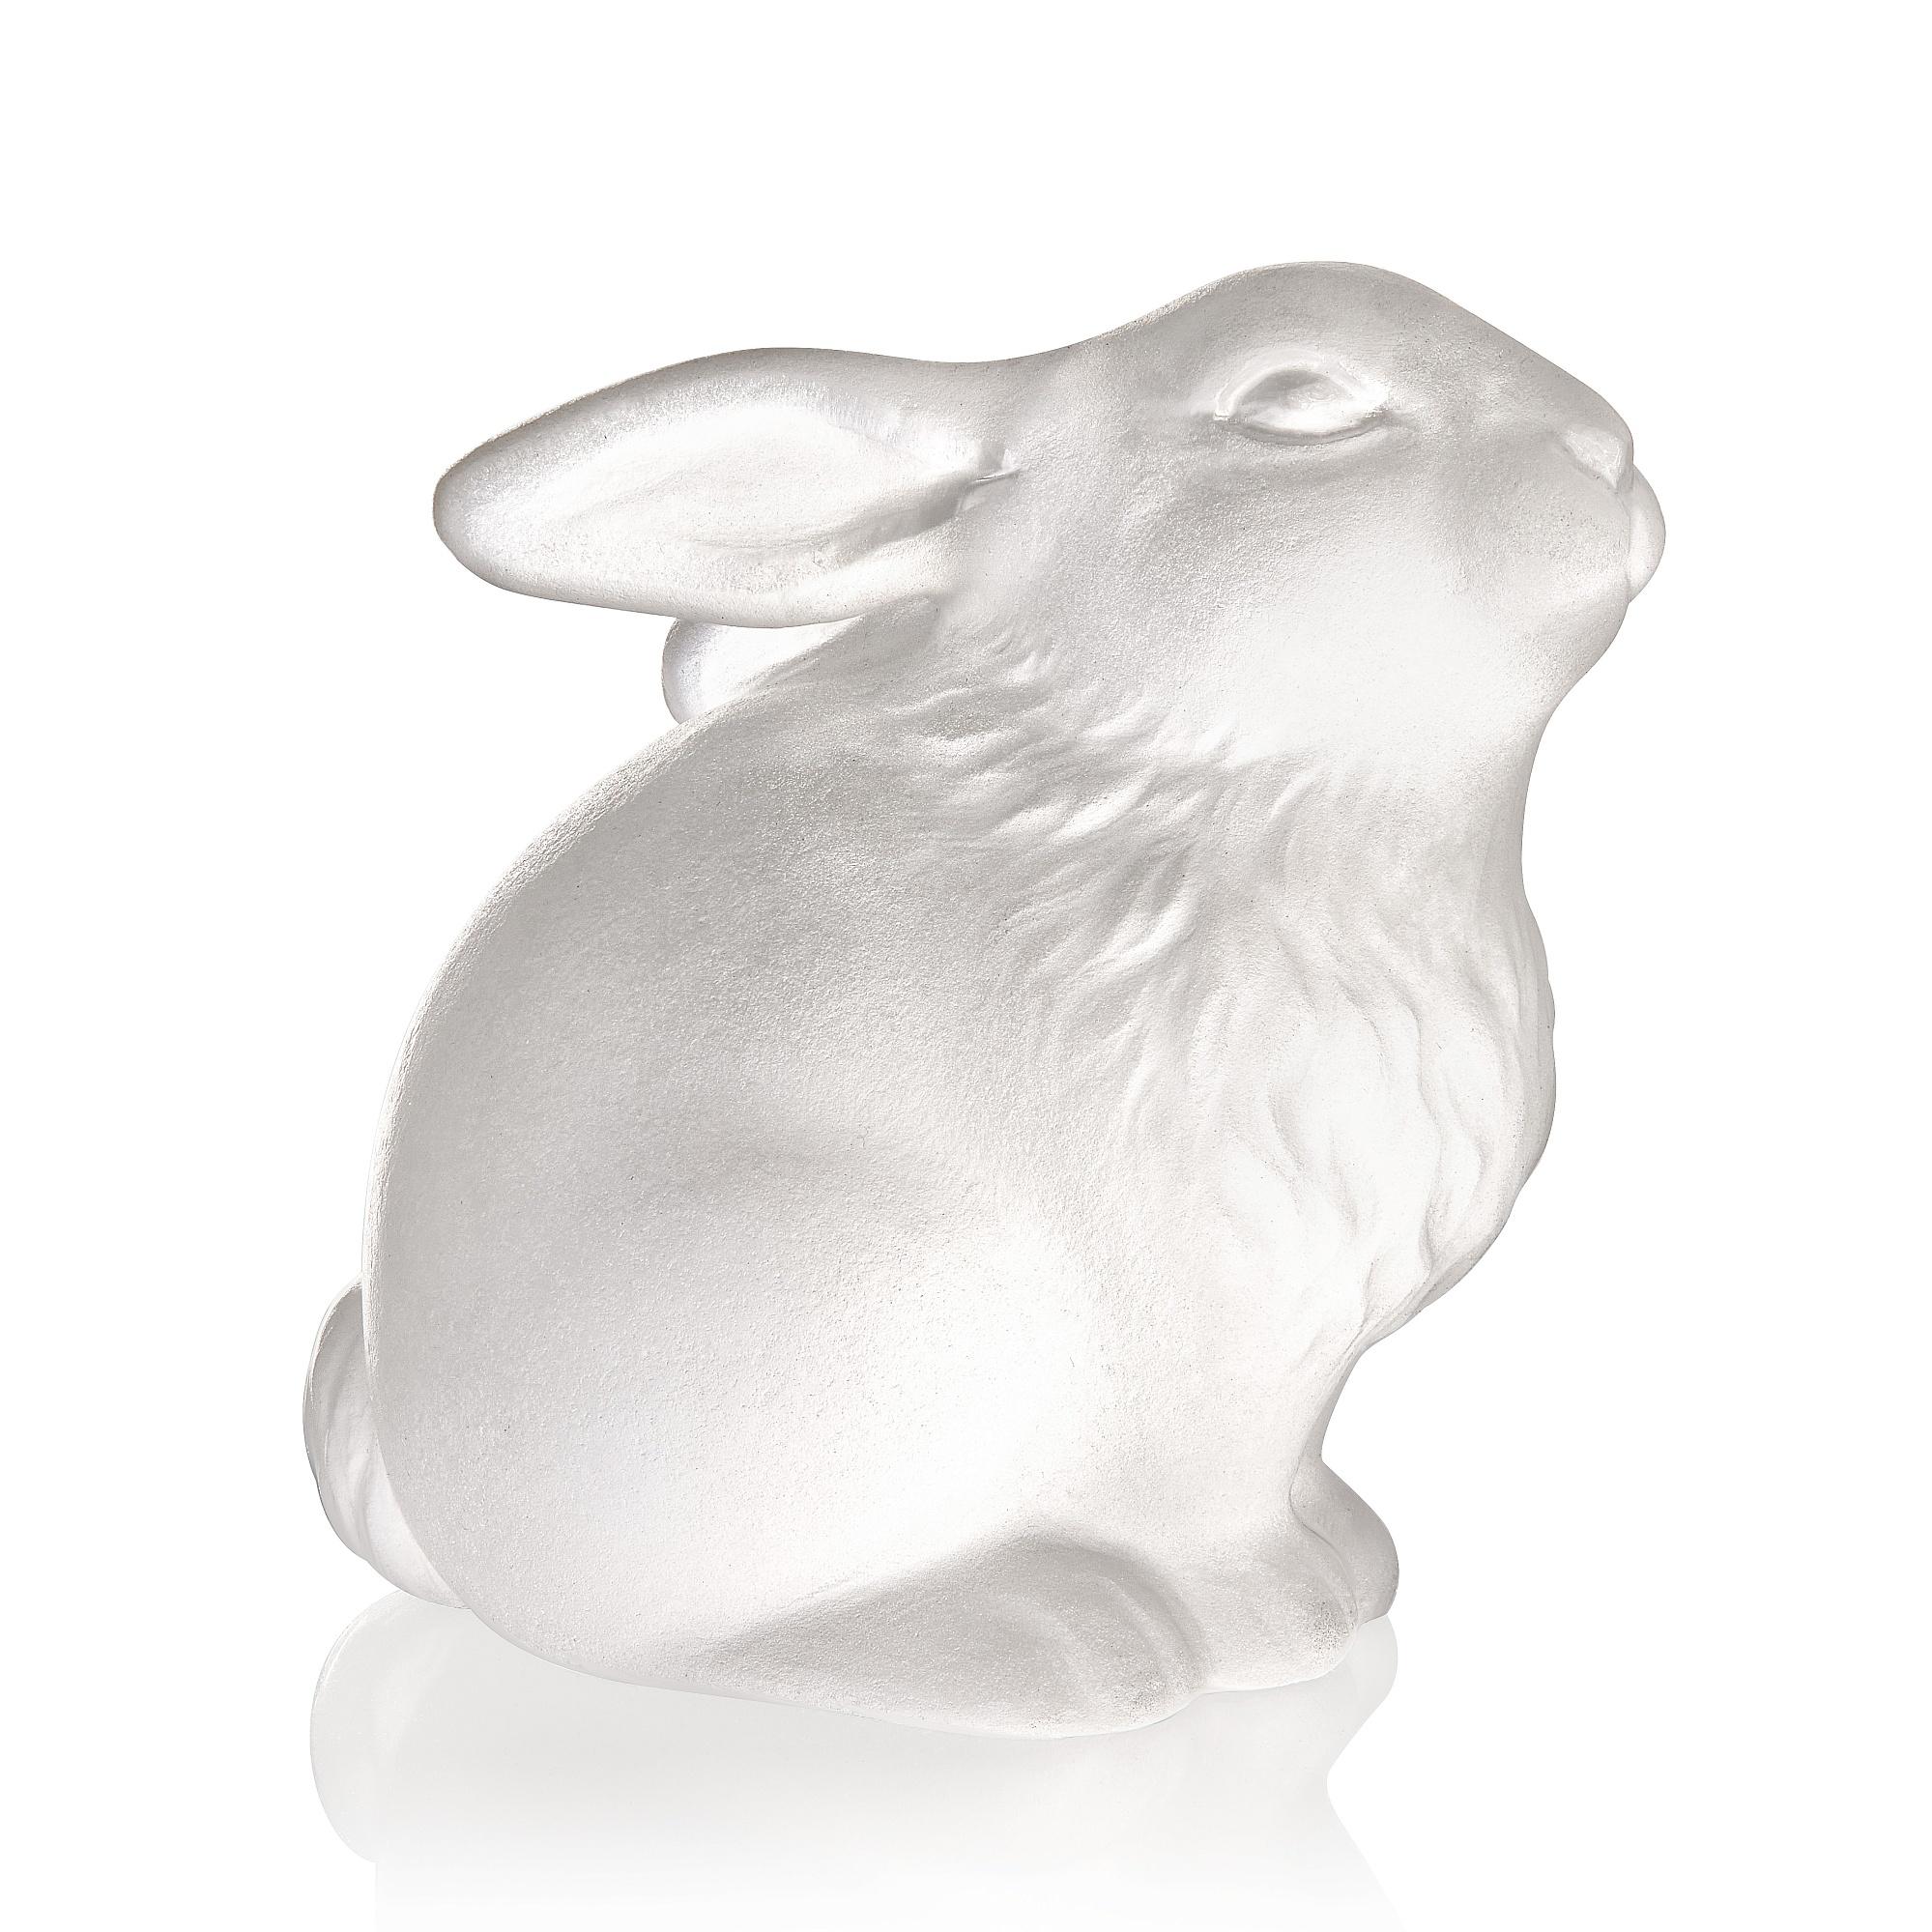 Round Cut MOISEIKIN Silver Gold Plated Rabbit Easter Egg Miniature For Sale